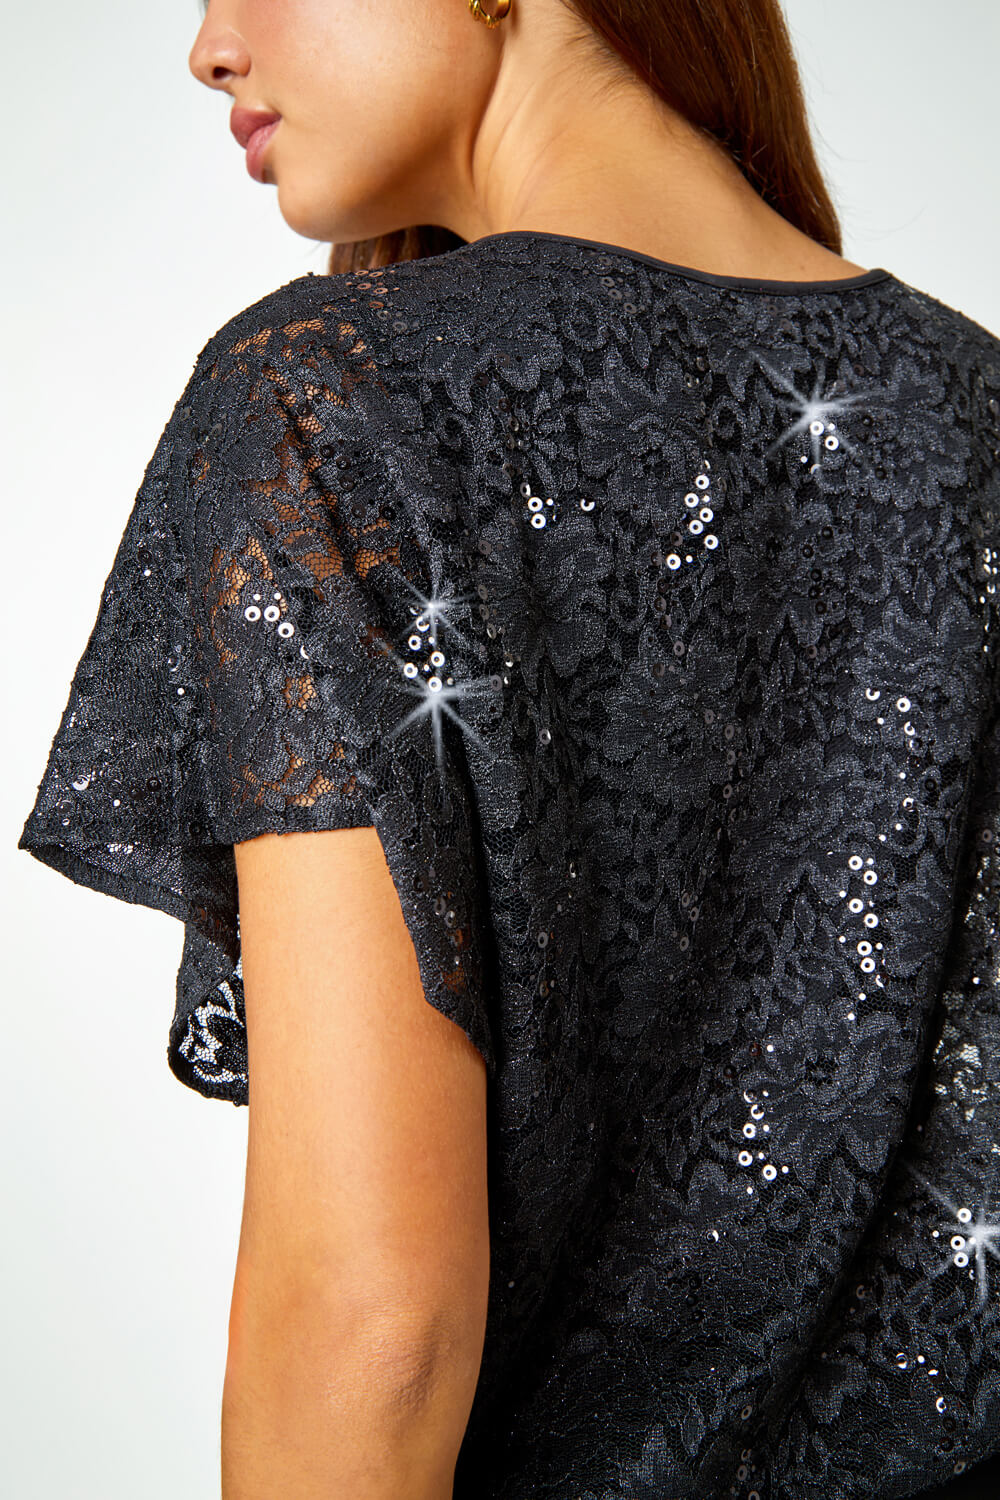 Black Sequin Lace Overlay Stretch Top, Image 5 of 5